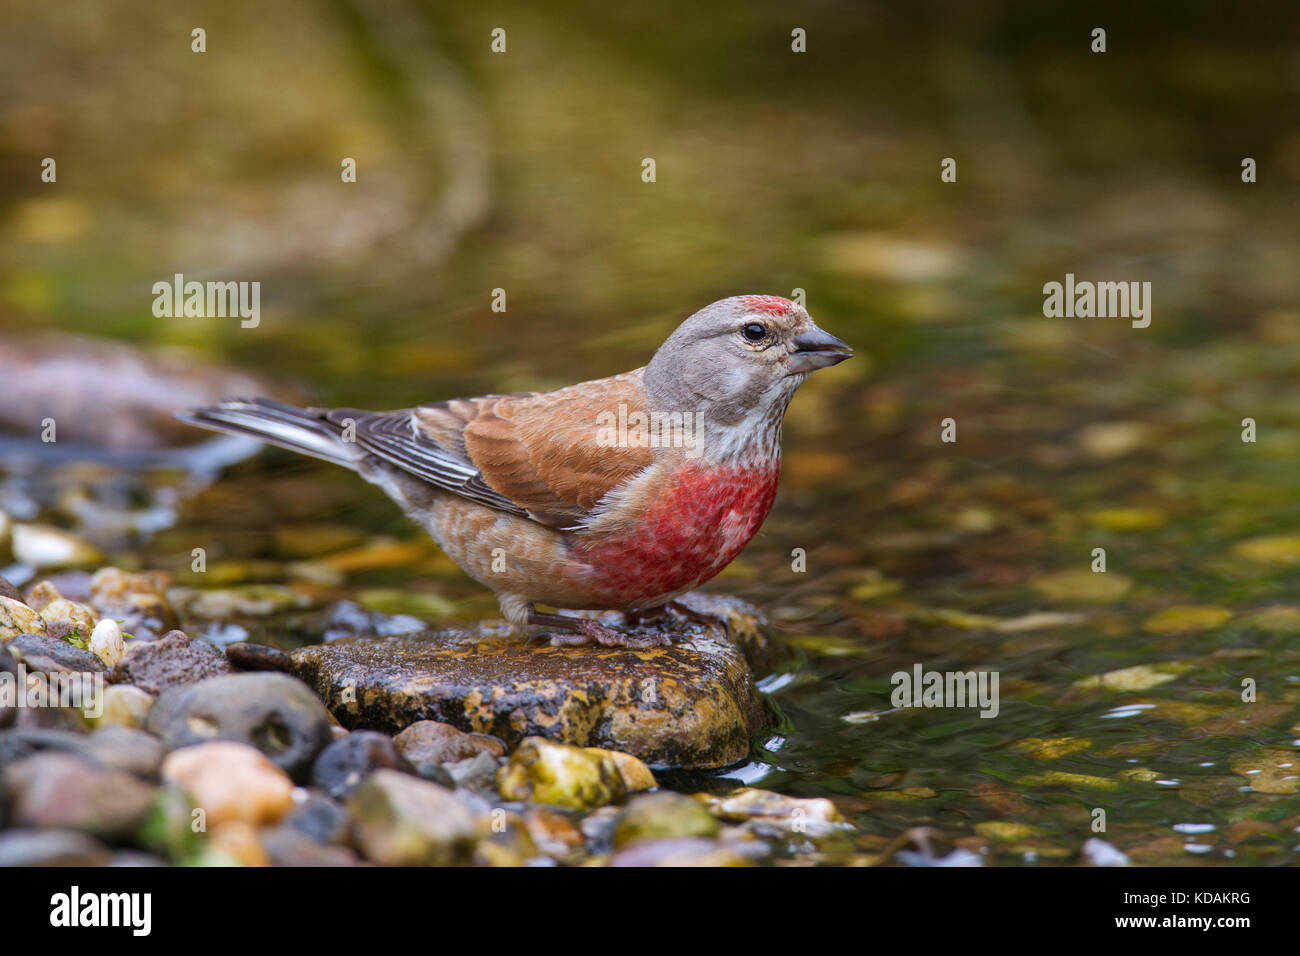 Common linnet (Linaria cannabina / Acanthis cannabina / Carduelis cannabina) male drinking water from brook Stock Photo